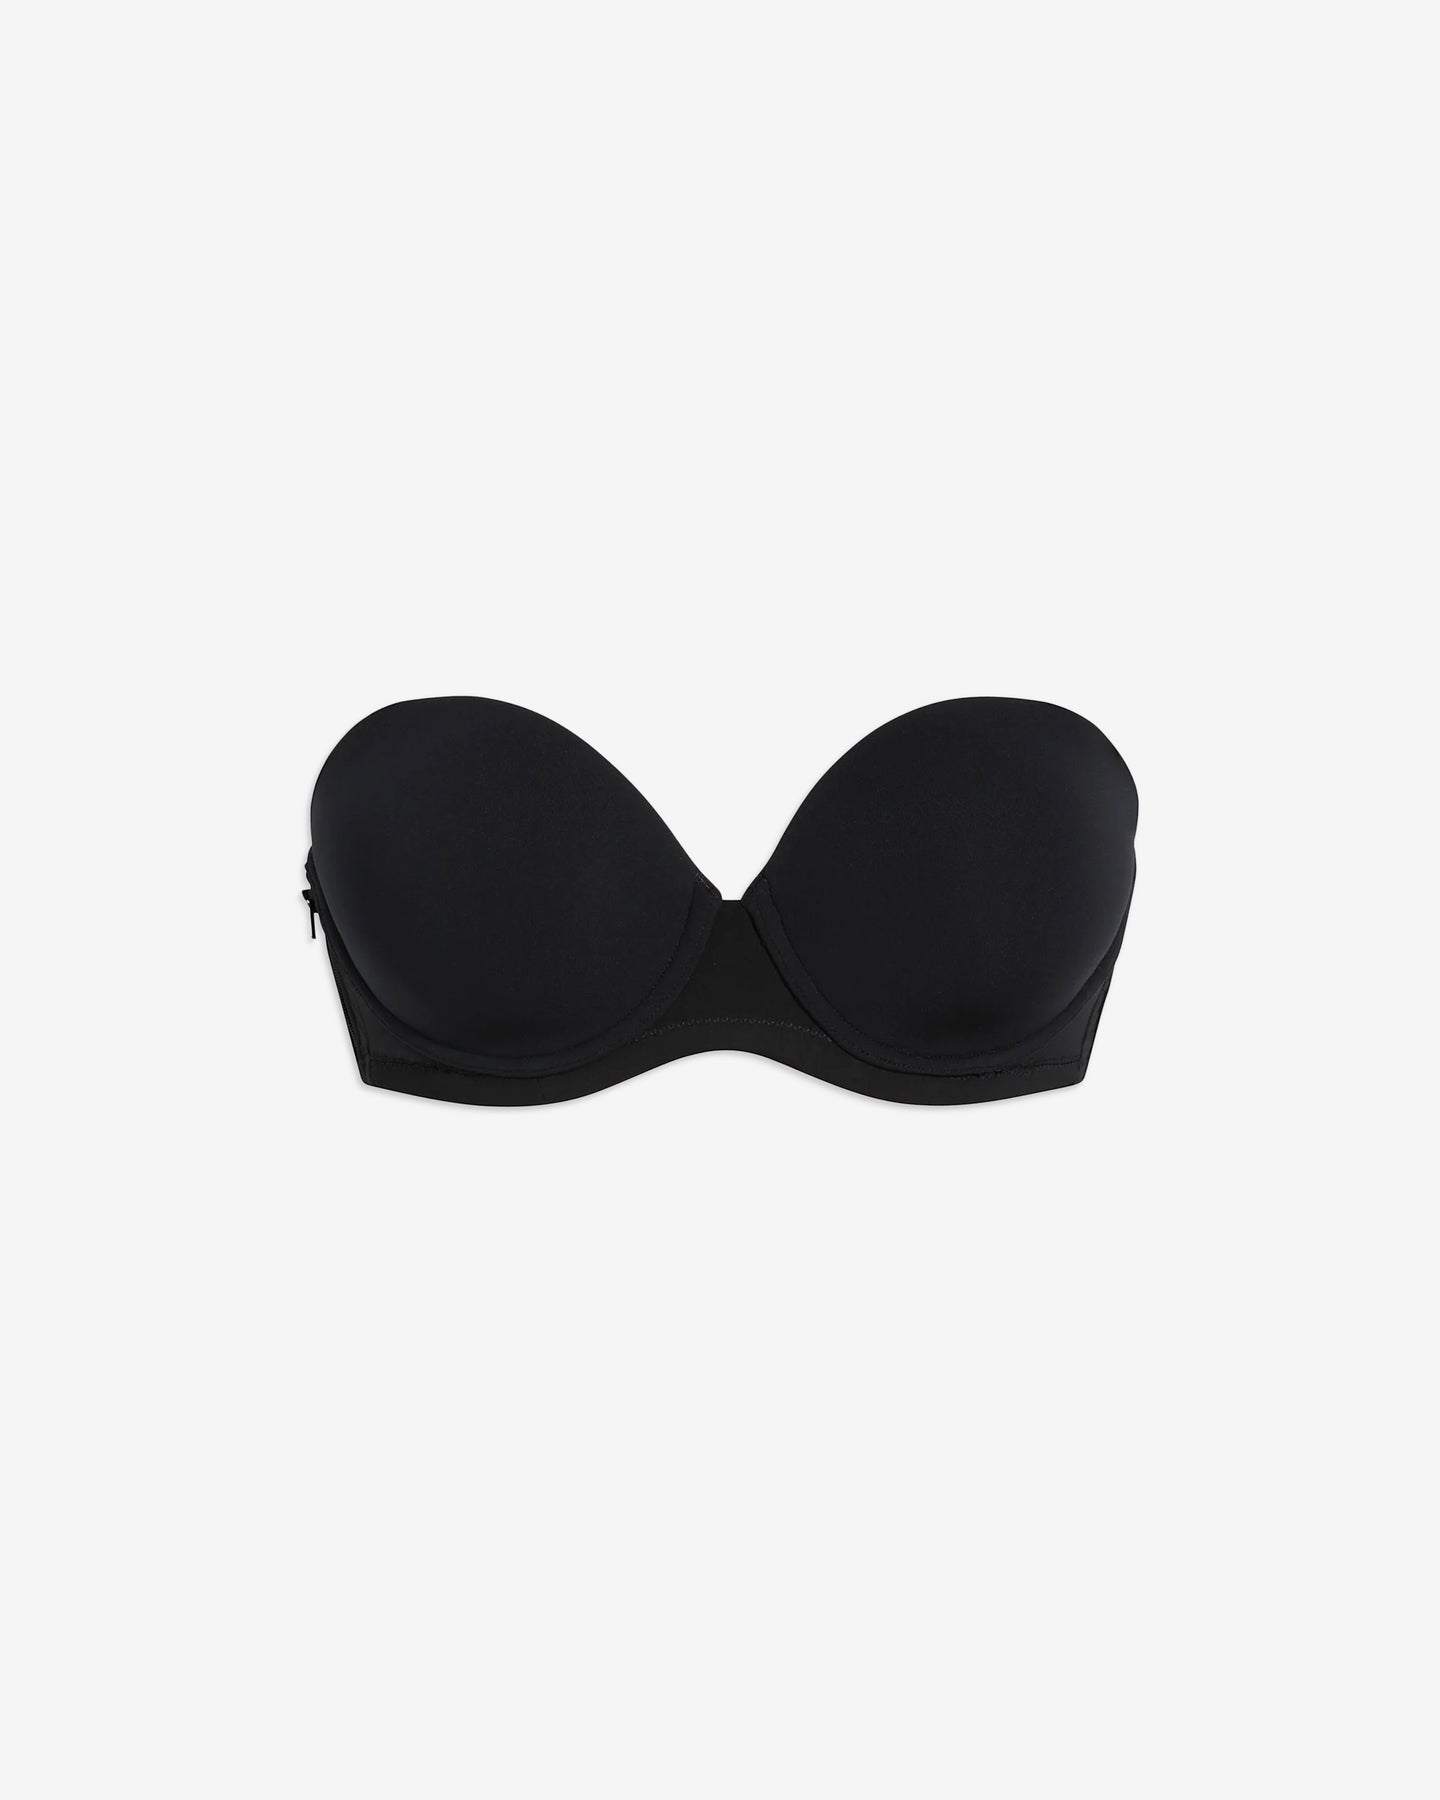 Moscow Printed Push-Up Bra